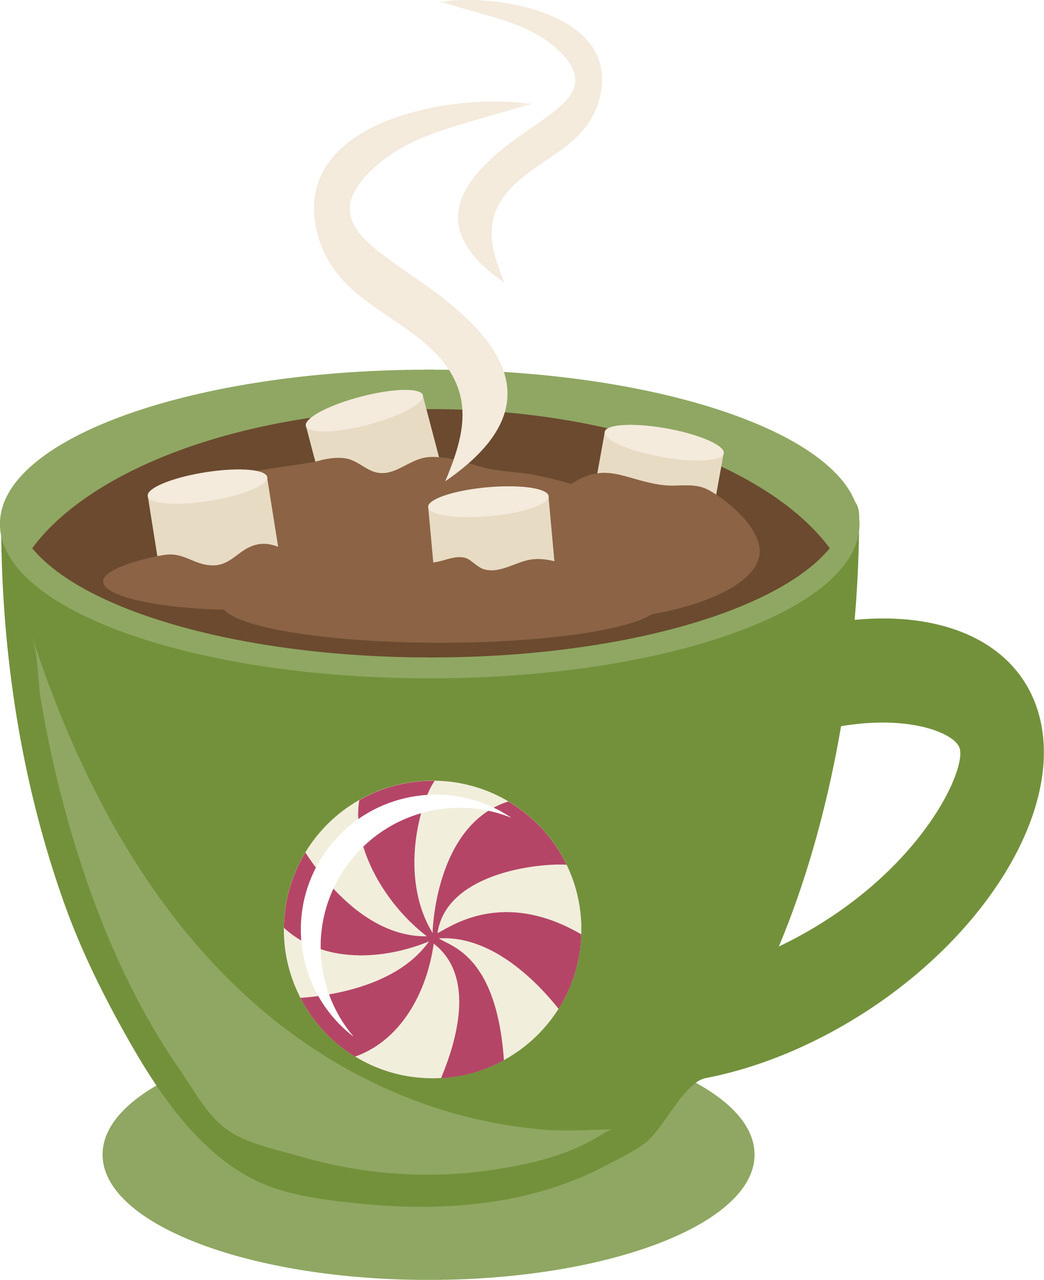 Hot chocolate clipart no background 